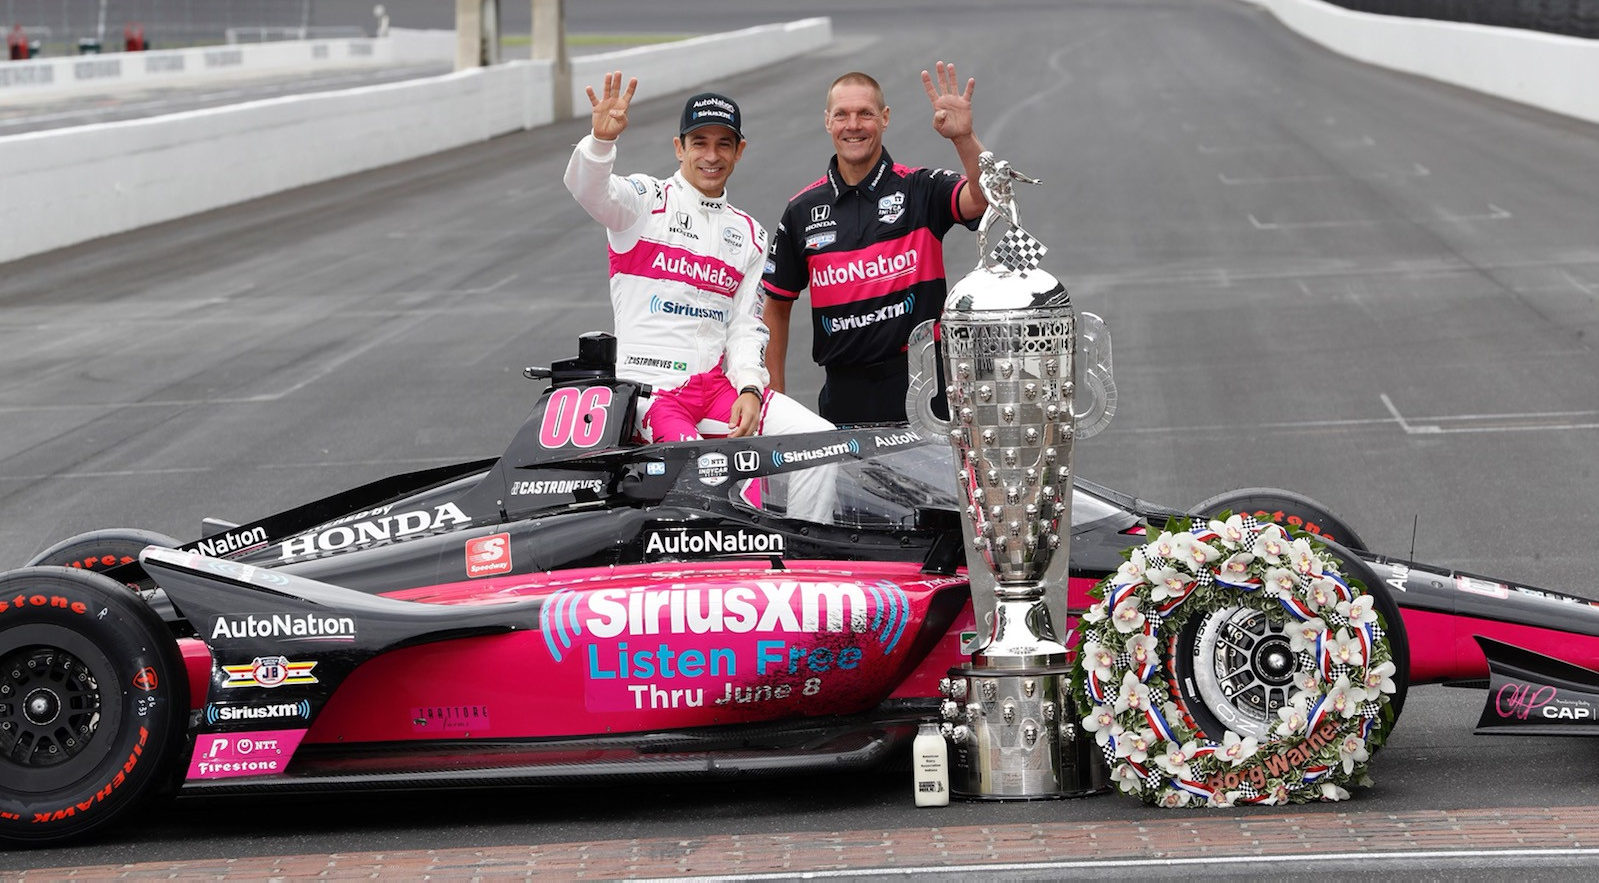 Former motorcycle road racer Perry Melneciuc (right) with 2021 Indy 500 race winner Helio Castroneves (left) and the Meyer Shank Racing #06 car at Indianapolis Motor Speedway the day after the race. Photo courtesy Meyer Shank Racing.